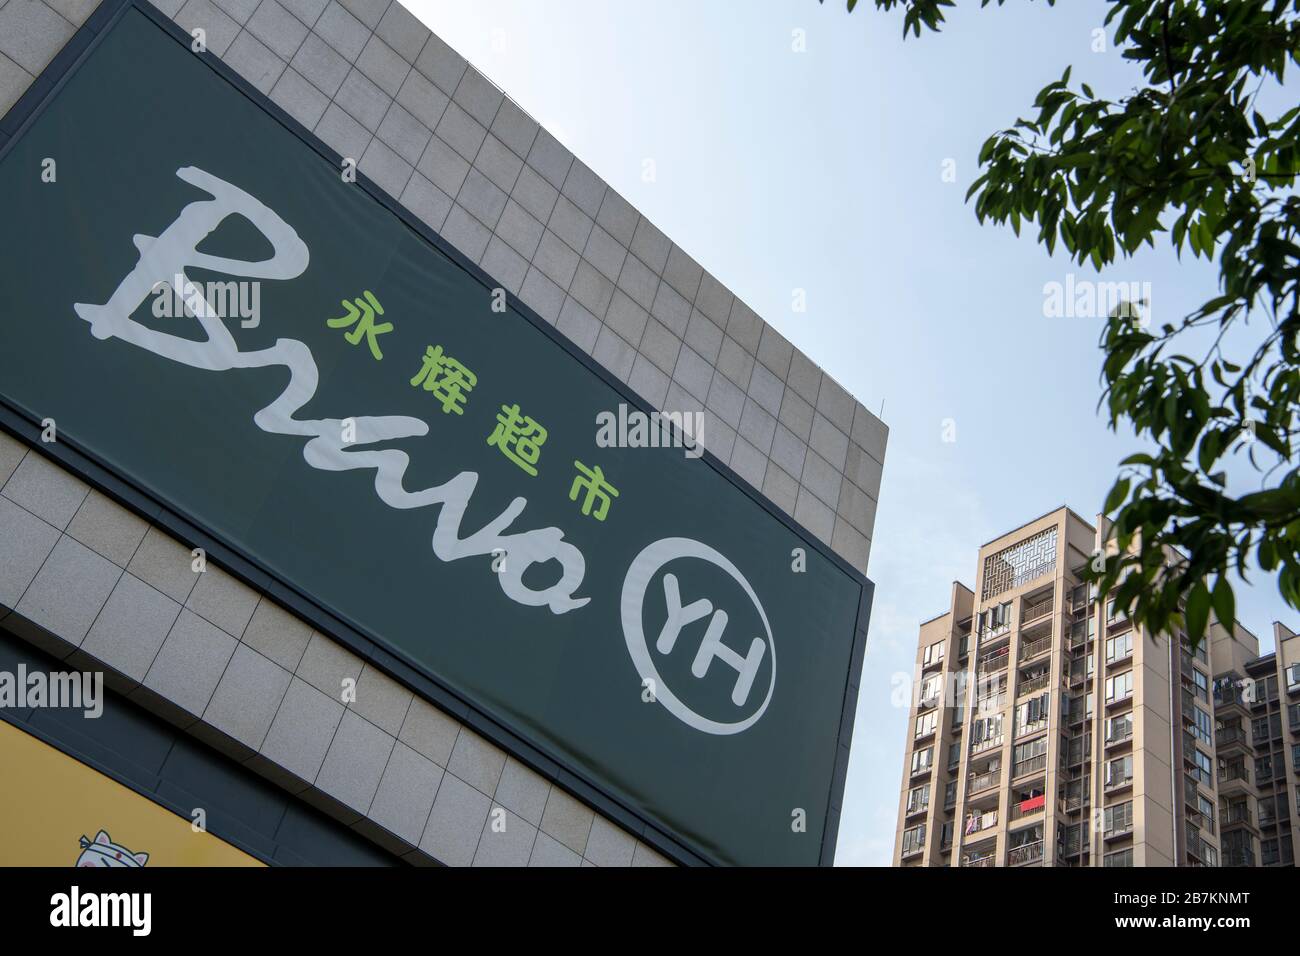 In this unlocated photo, the logo of Yonghui Superstores, a China-based company principally engaged in the operation of regular chain supermarkets, is Stock Photo